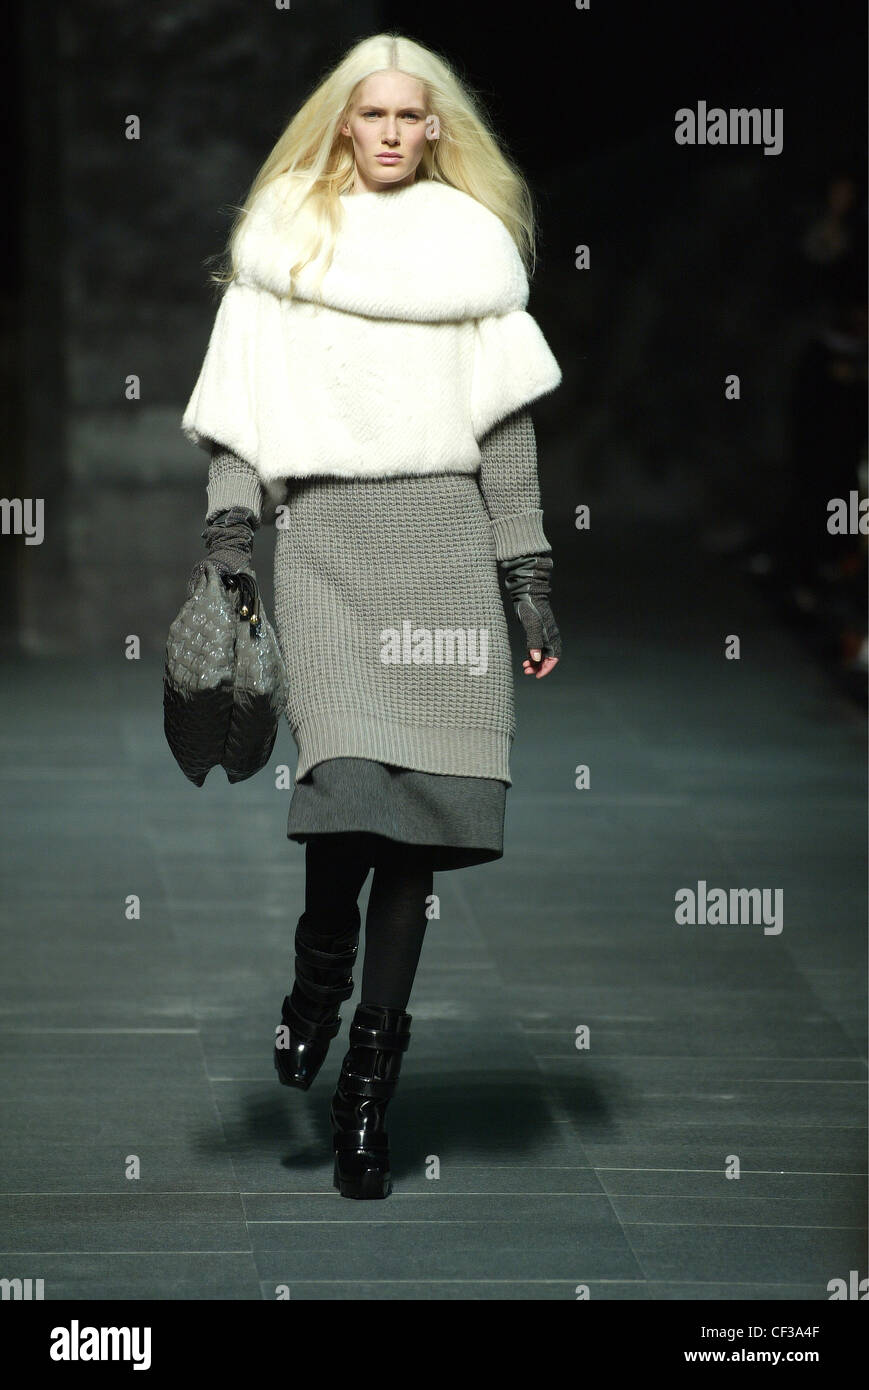 Louis Vuitton Model Romina Lanaro very long blonde hair wearing white fur  cape over grey knitted jumper dress over grey wool Stock Photo - Alamy